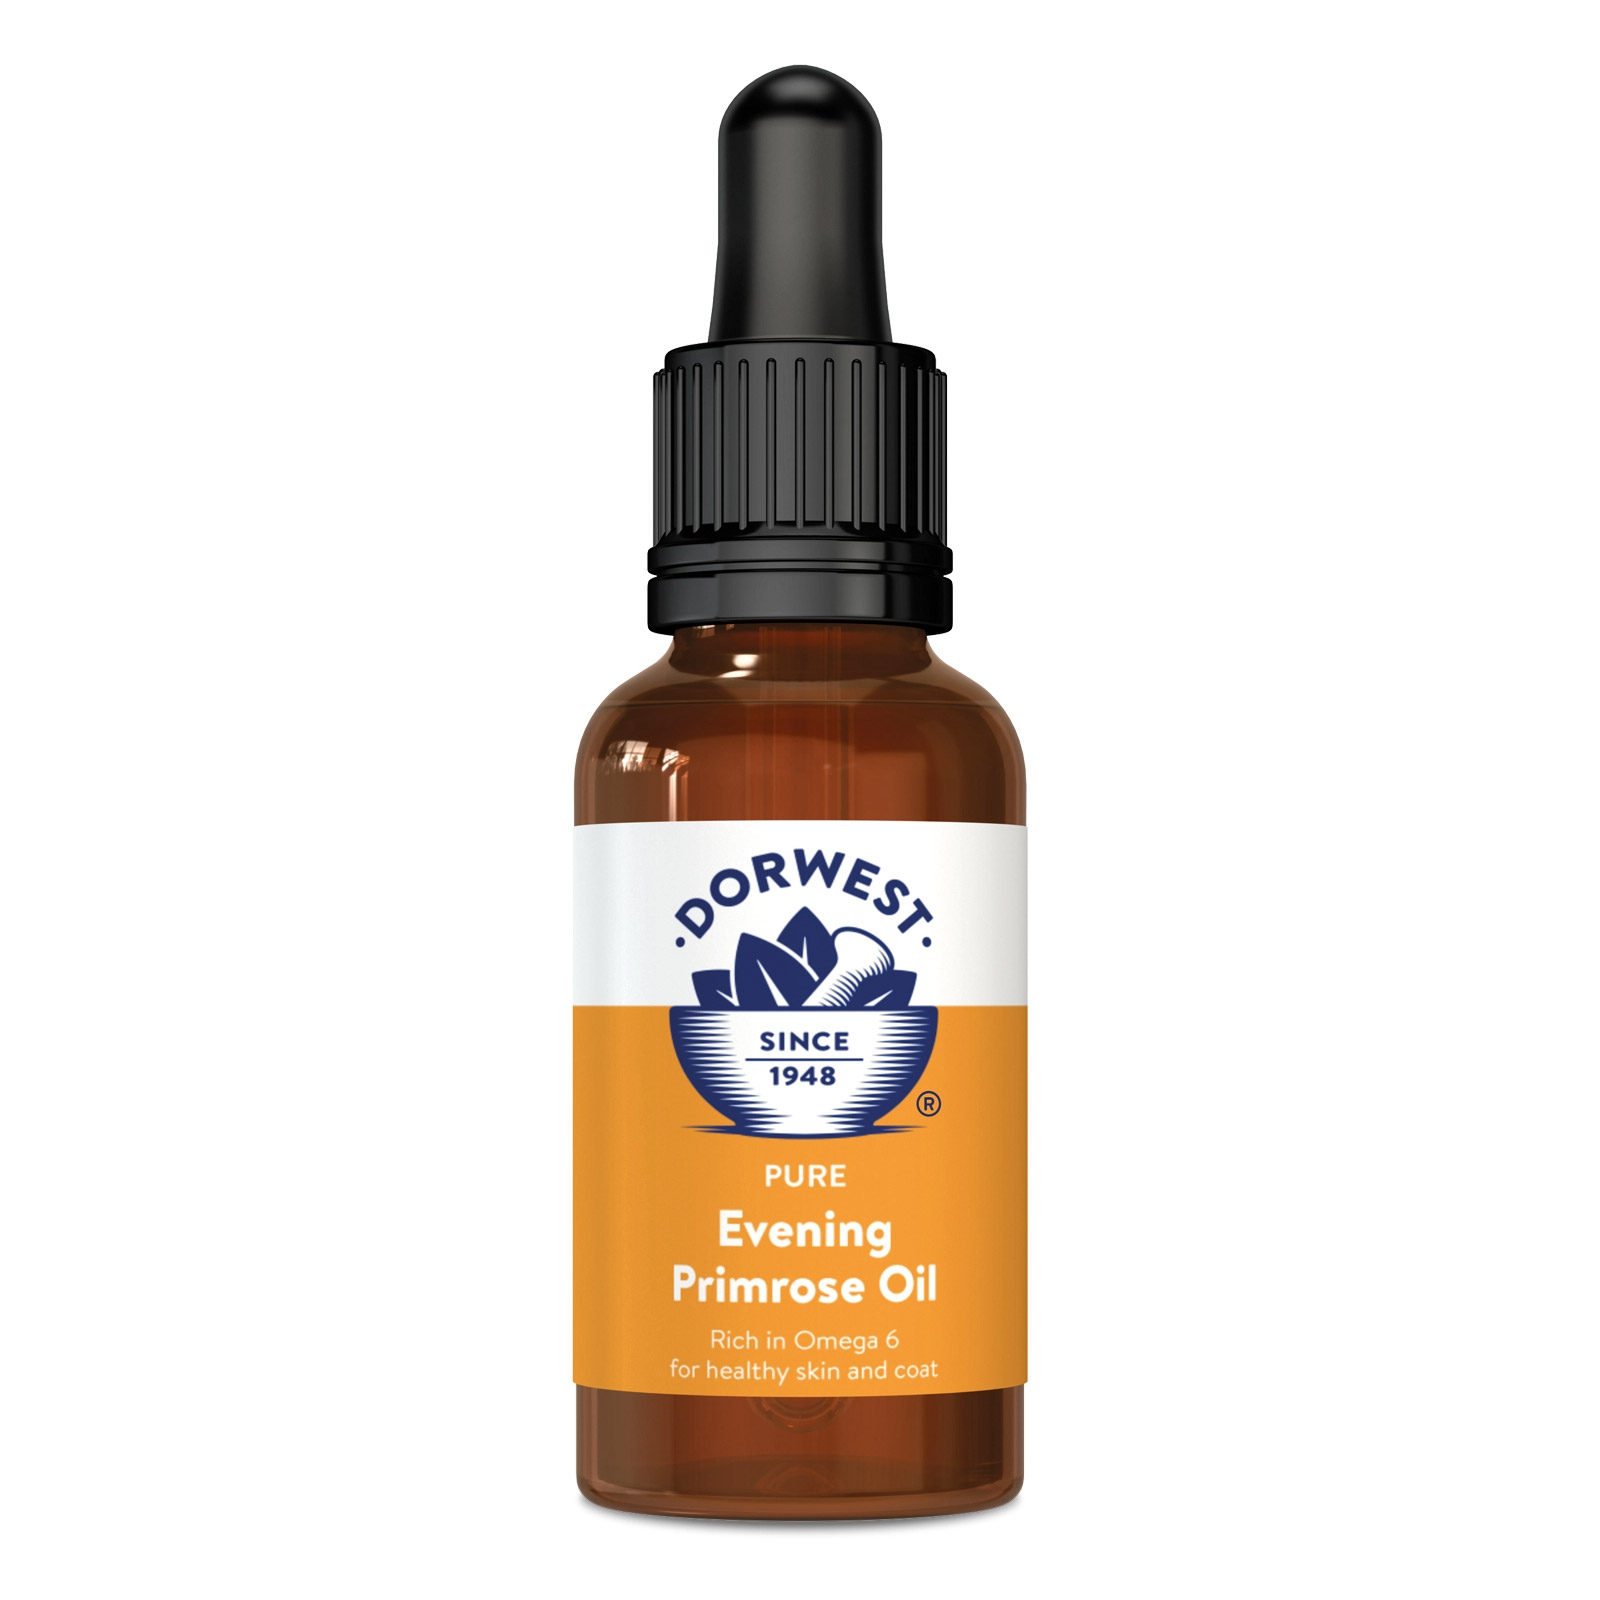 Dorwest Evening Primrose Oil Liquid For Dogs And Cats 30 Ml
